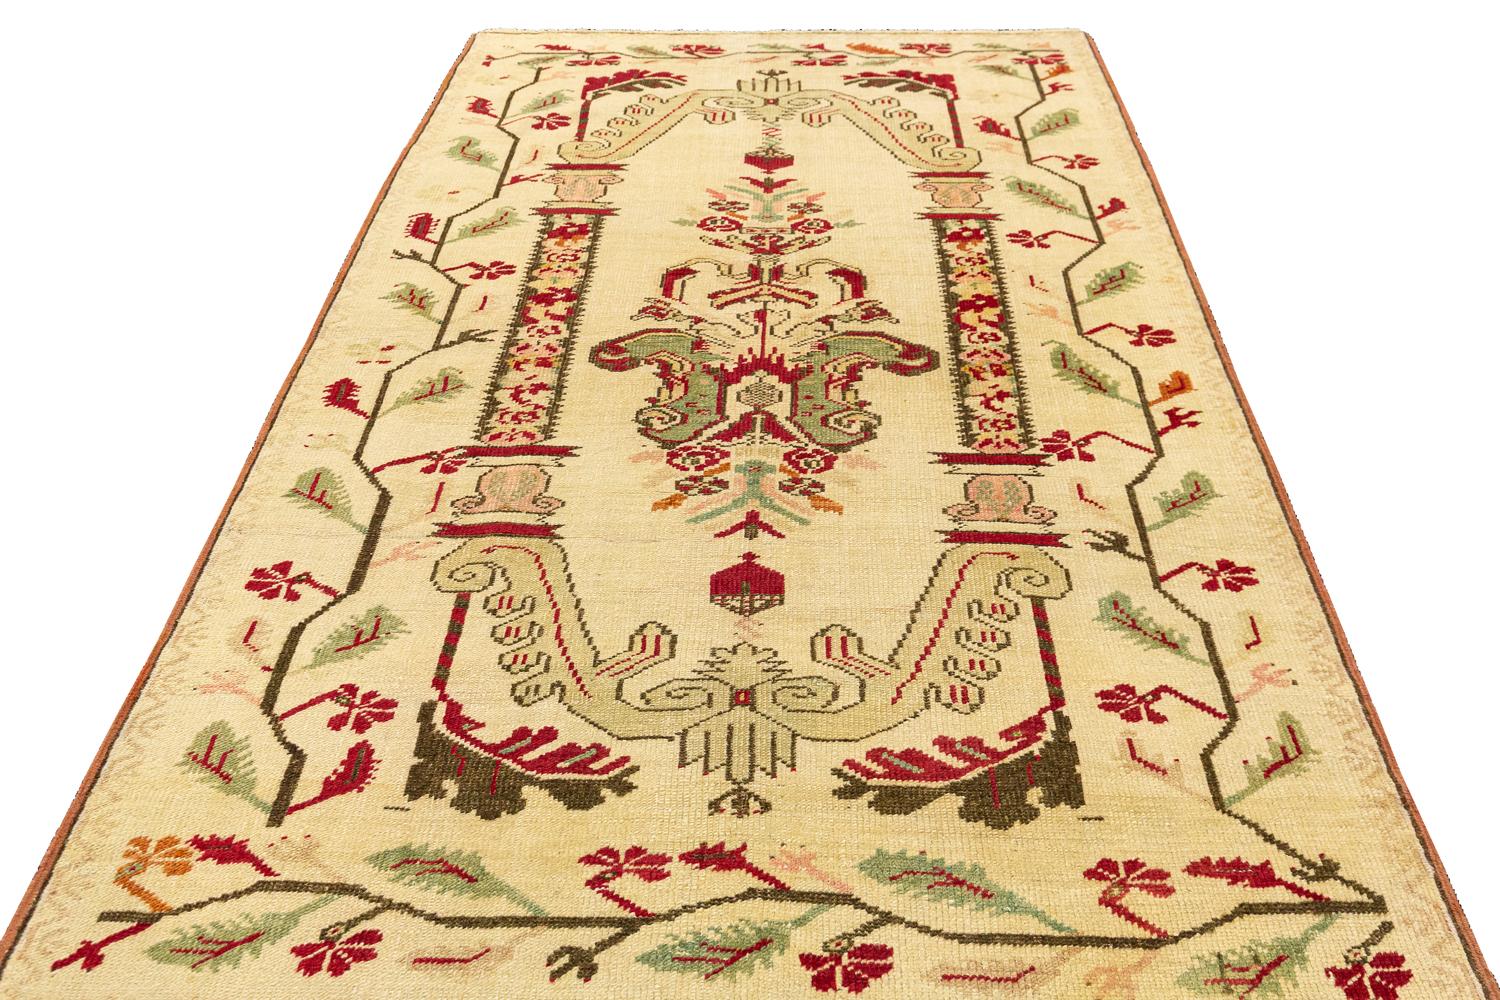 This Antique Turkish Ghiordes Rug is a true work of art. The intricate, hand-woven design is over 100 years old and showcases the talent and artistry of the rug weaver of that era. The wool quality ensures that this rug will be a cherished addition